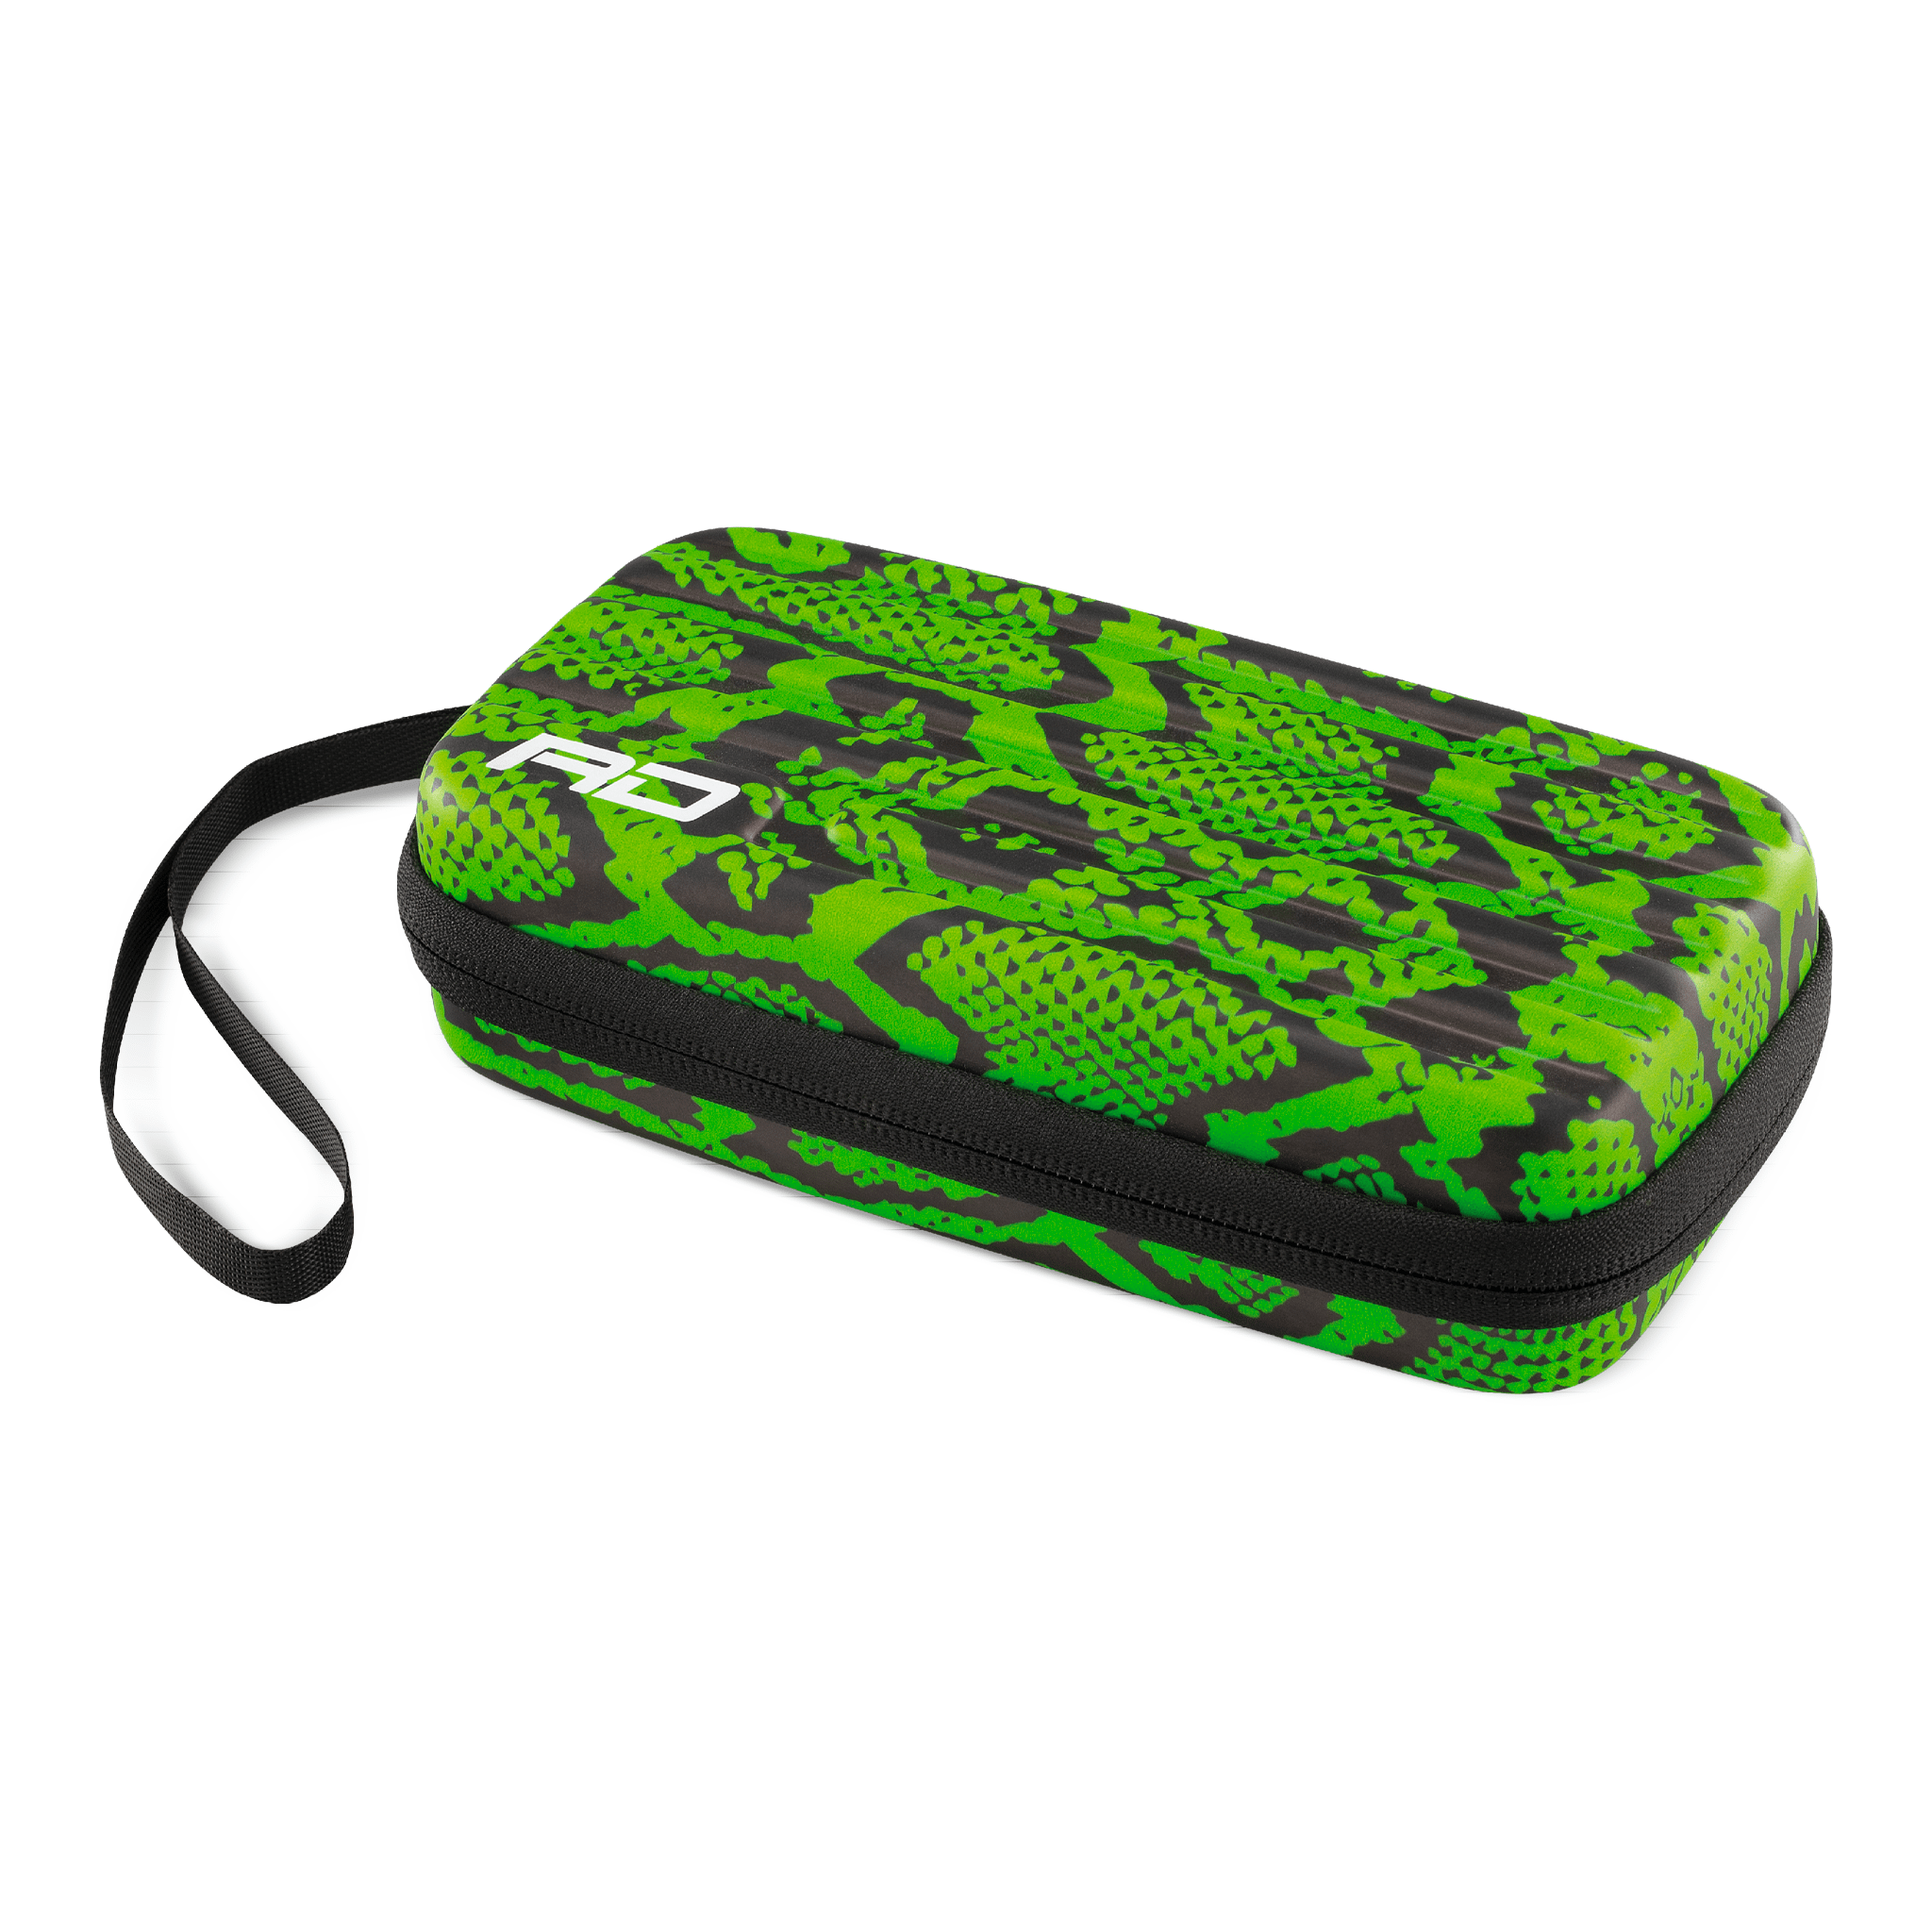 Red Dragon Peter Wright Snakebite Monza Darts Case Green Cases